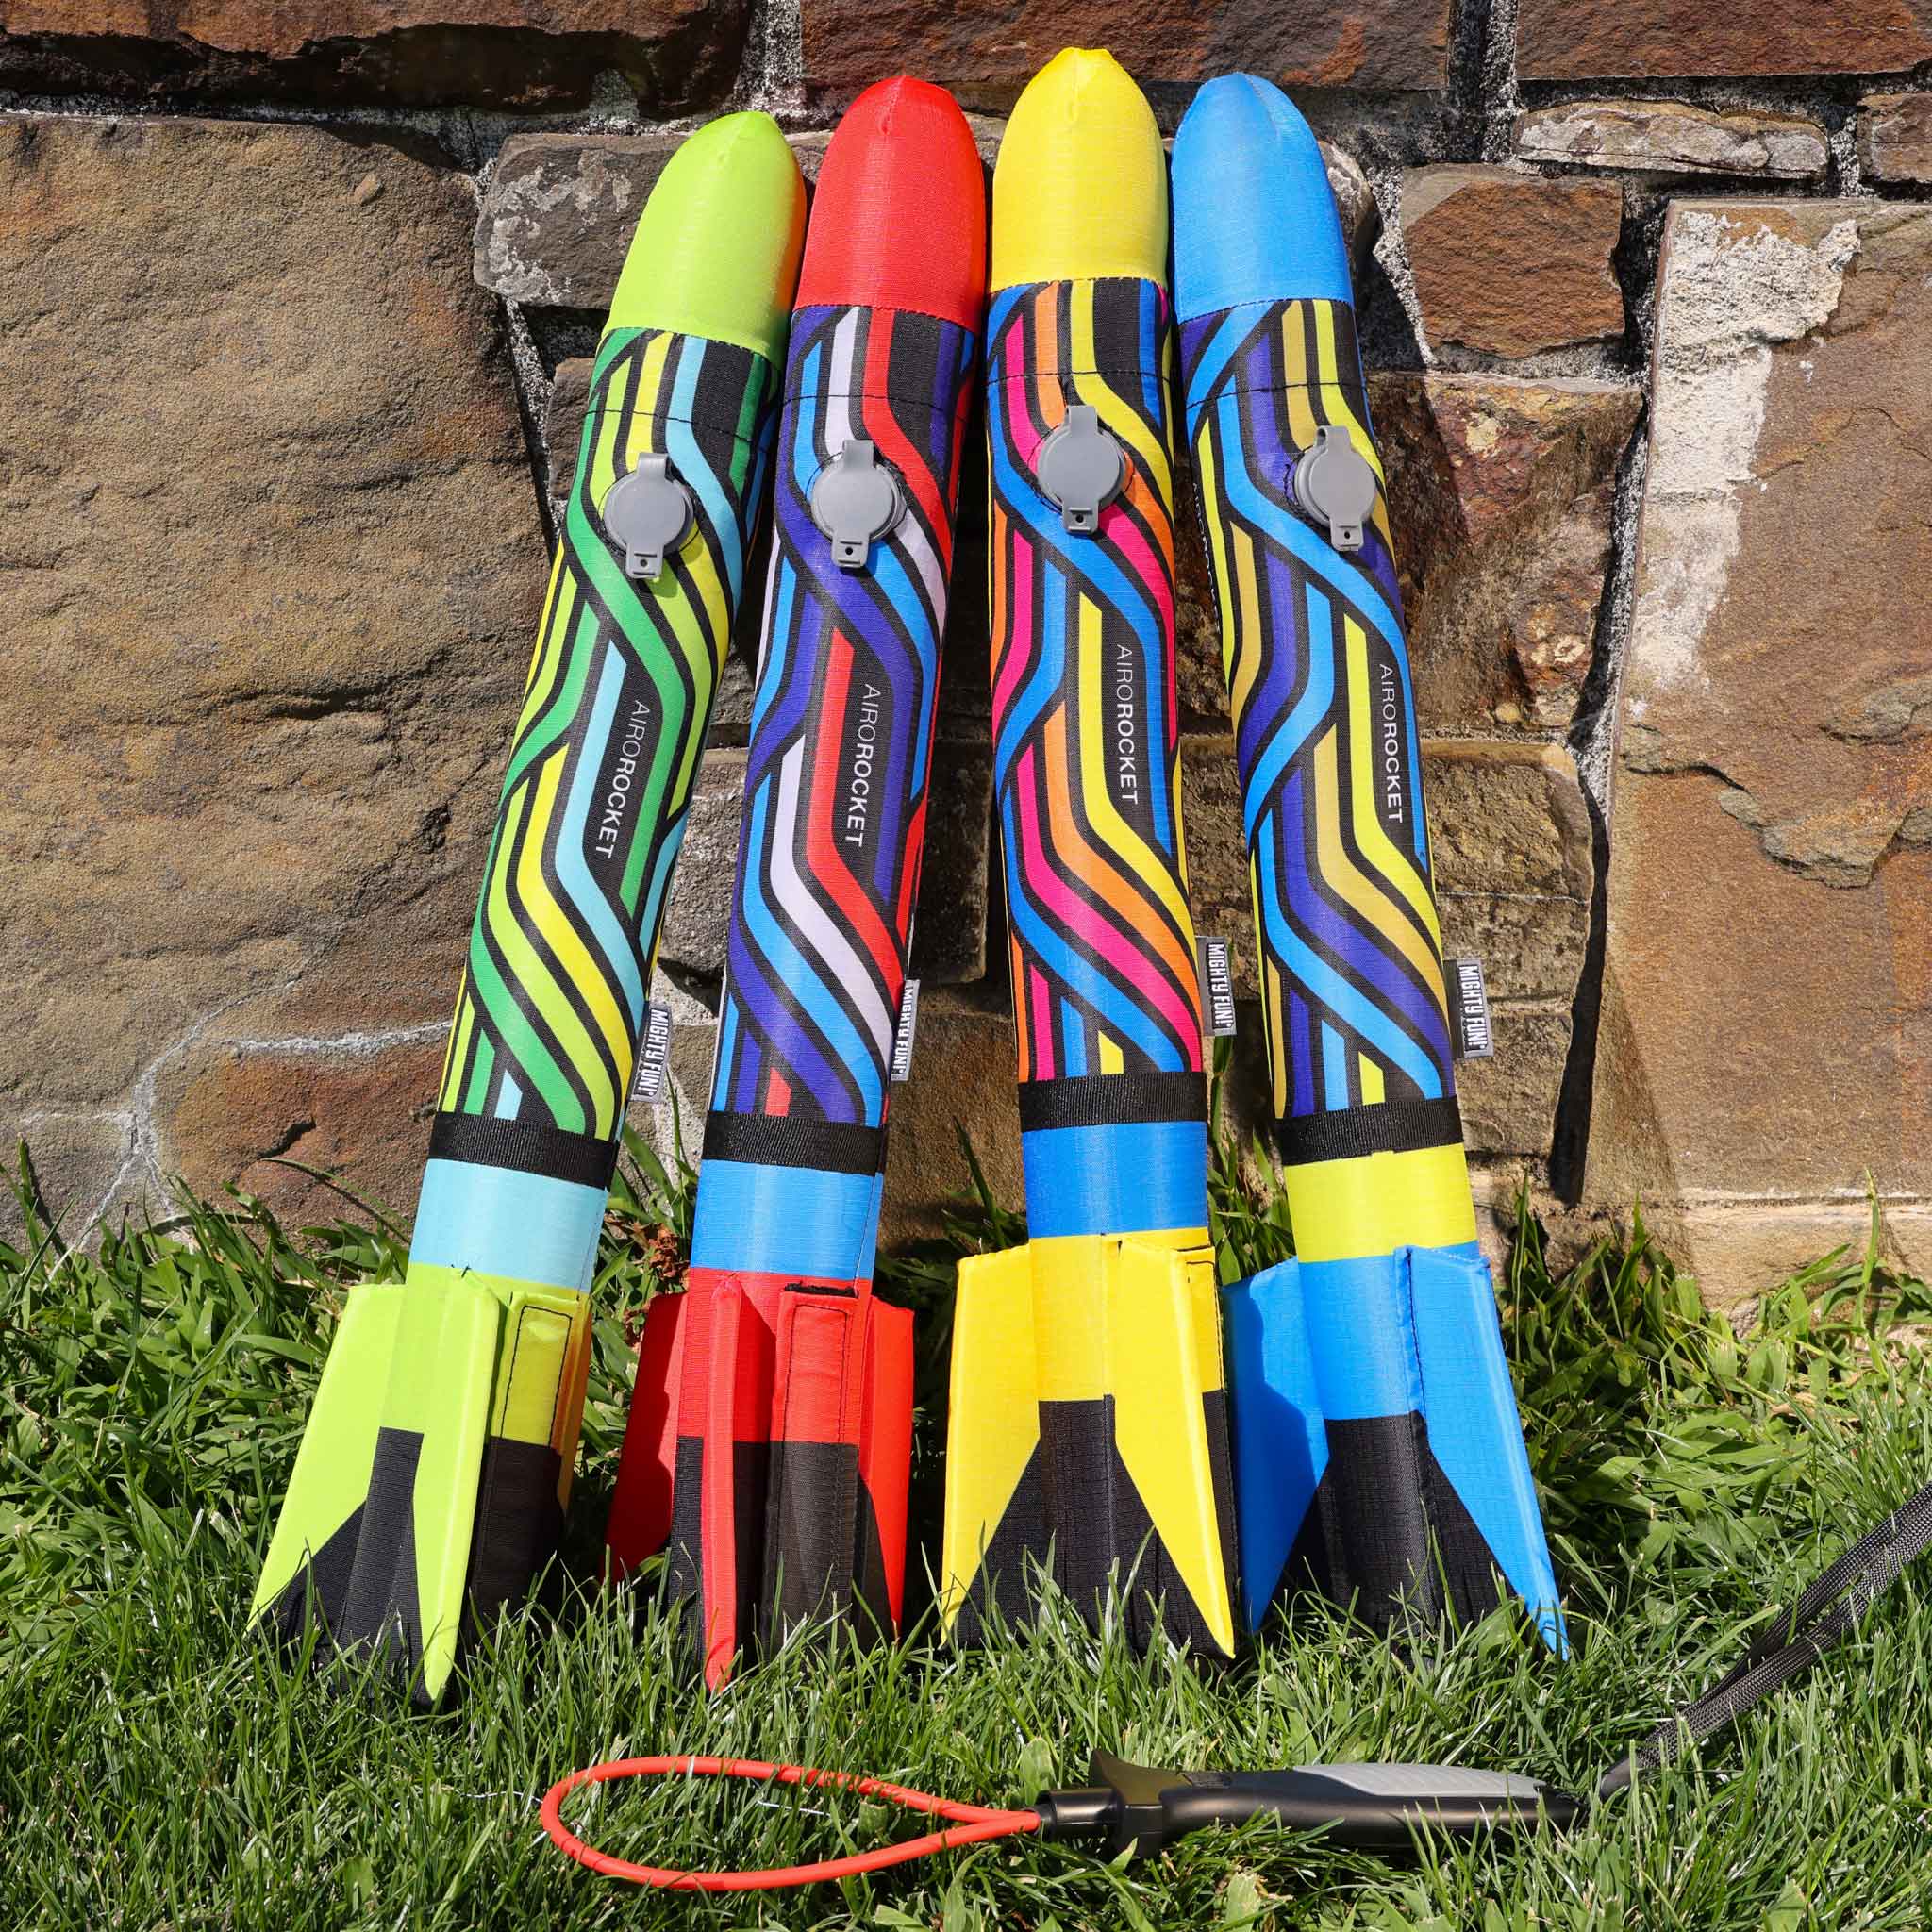 Airo Rocket toy rocket in all 4 colors: red, lime, yellow and blue outside by Mighty Fun!